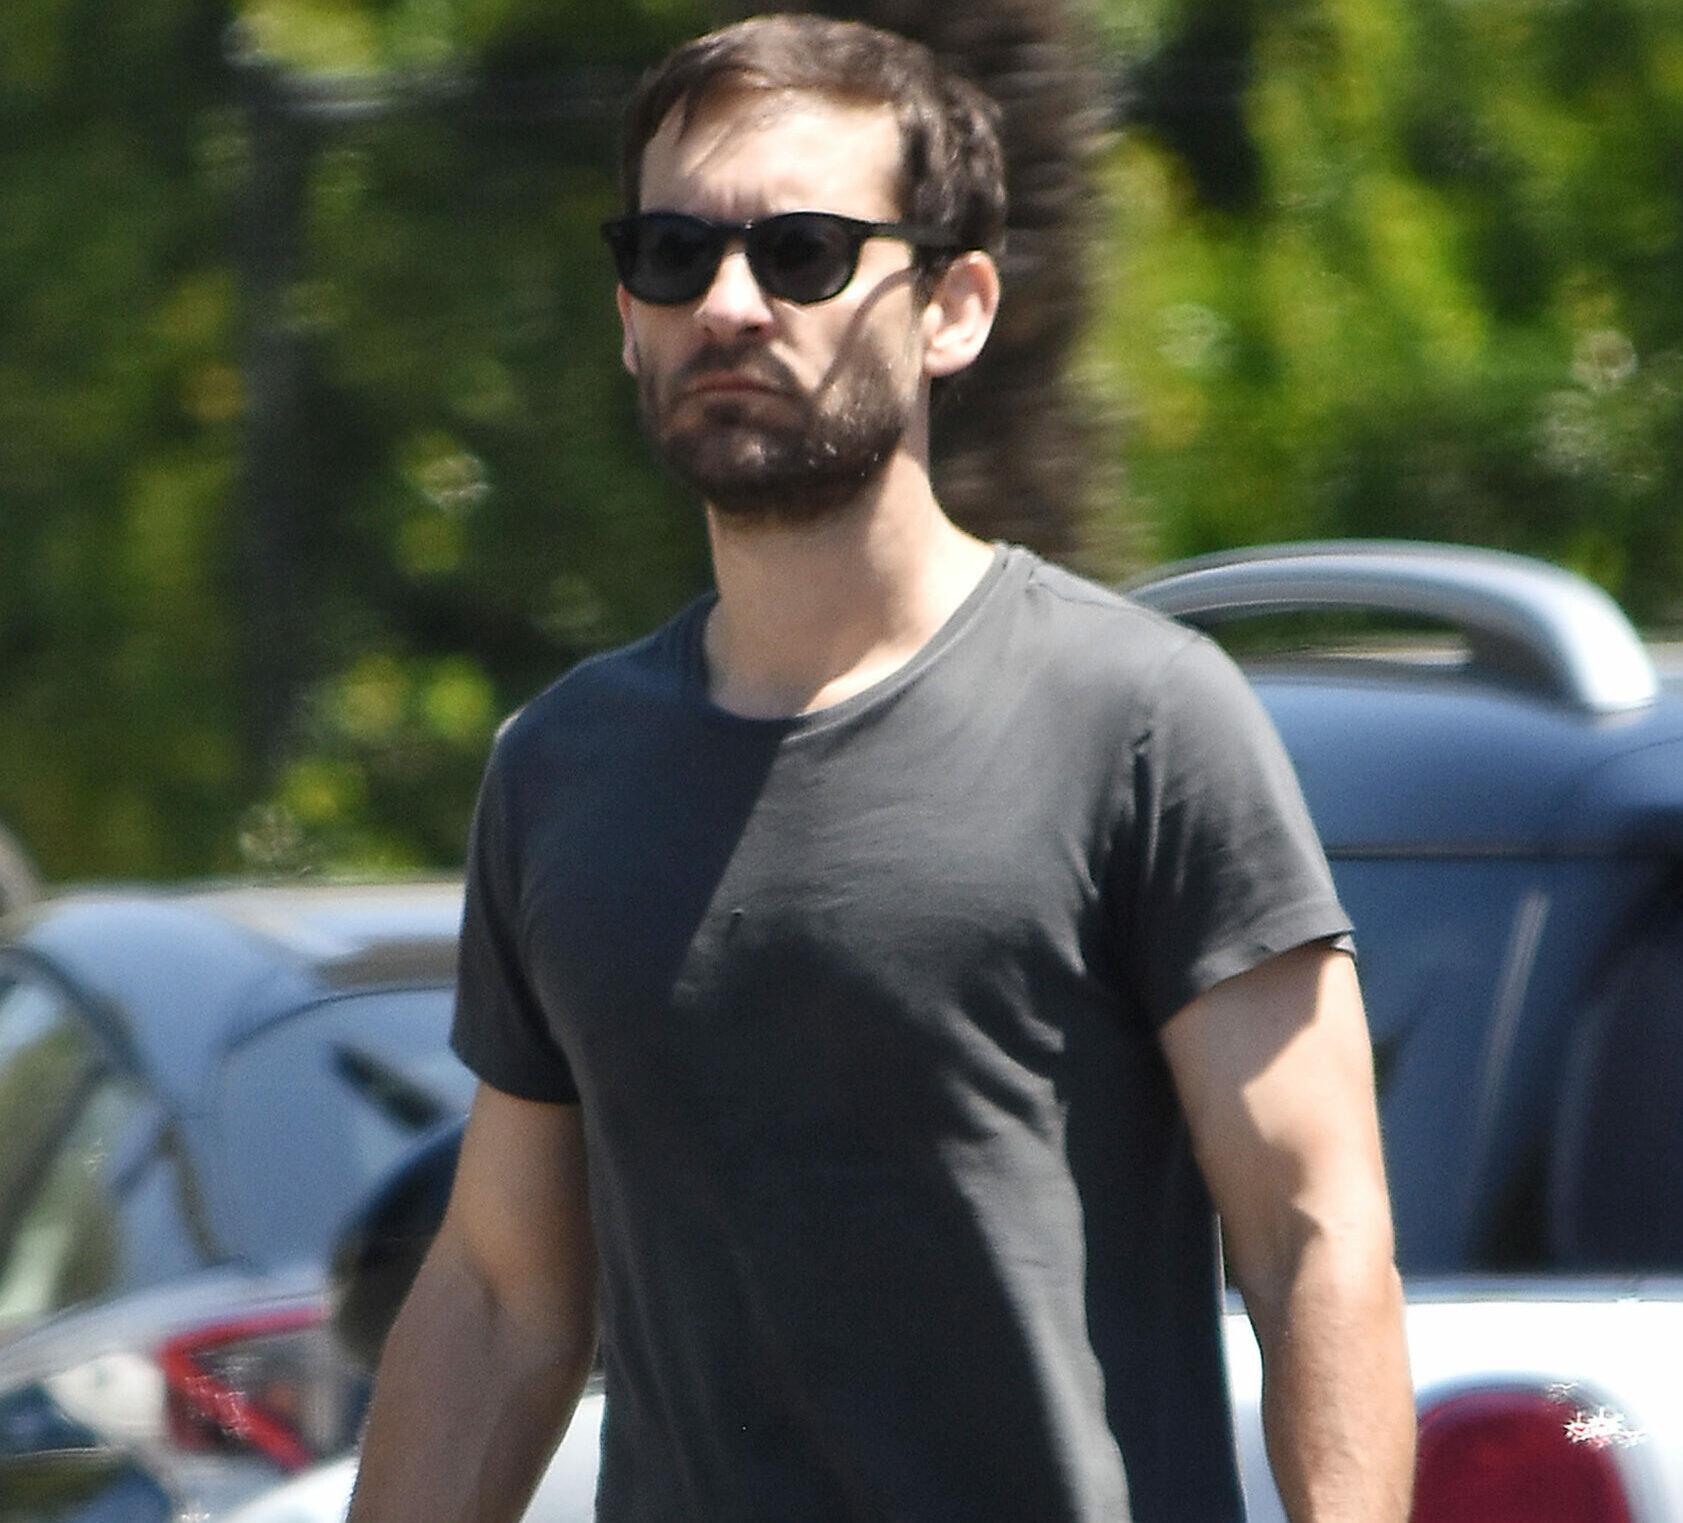 Tobey Maguire finishes his workout as he displays his buffed arms in Los Angeles. 12 Jun 2018.